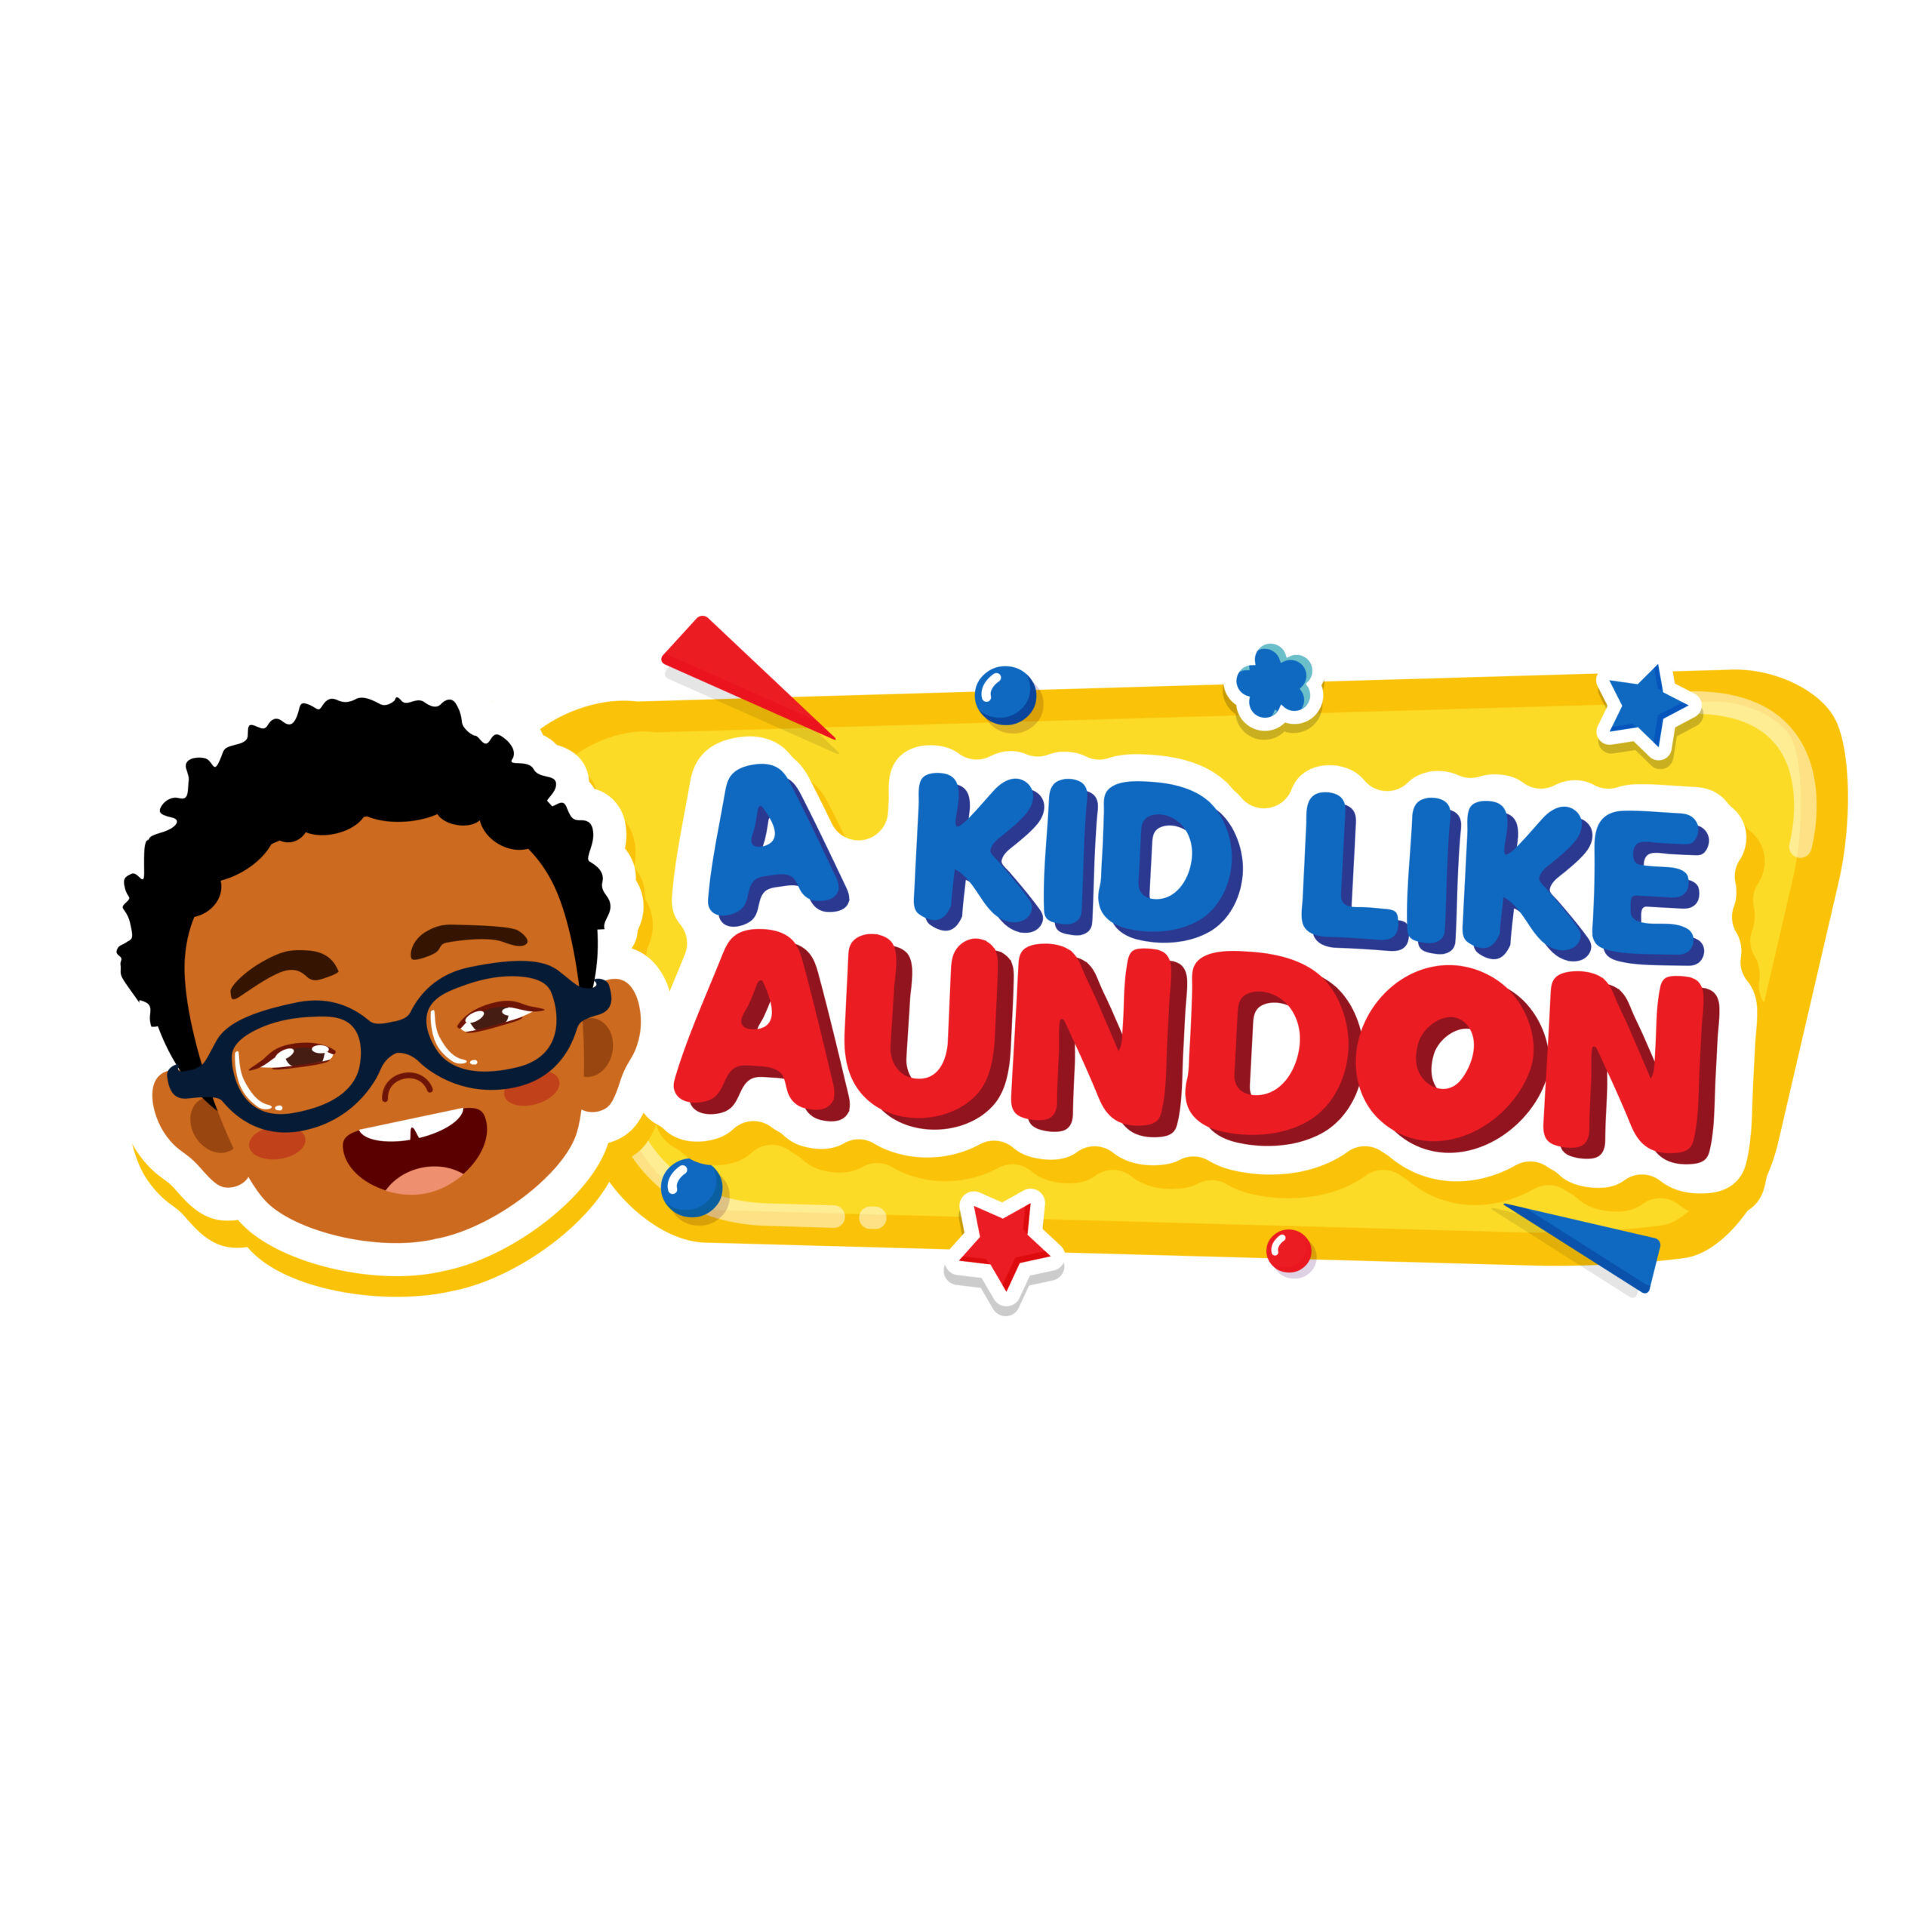 A Kid Like Aundon was inspired by the journey of Aundon Cade but the organization is here to help every child. Including yours.